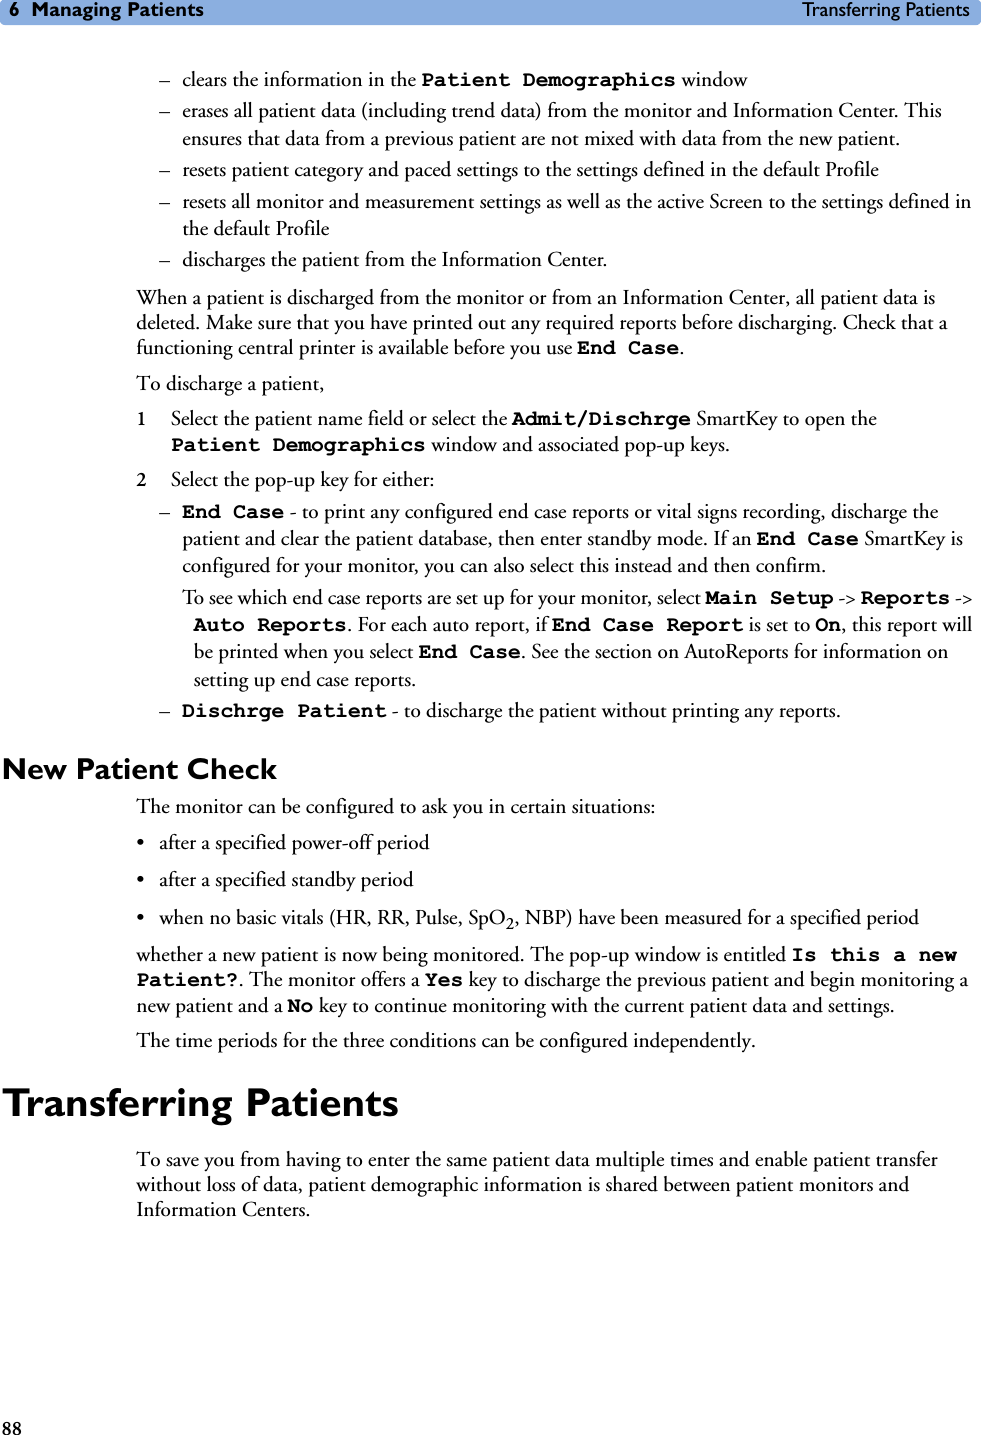 6 Managing Patients Transferring Patients88– clears the information in the Patient Demographics window – erases all patient data (including trend data) from the monitor and Information Center. This ensures that data from a previous patient are not mixed with data from the new patient. – resets patient category and paced settings to the settings defined in the default Profile– resets all monitor and measurement settings as well as the active Screen to the settings defined in the default Profile– discharges the patient from the Information Center. When a patient is discharged from the monitor or from an Information Center, all patient data is deleted. Make sure that you have printed out any required reports before discharging. Check that a functioning central printer is available before you use End Case.To discharge a patient, 1Select the patient name field or select the Admit/Dischrge SmartKey to open the Patient Demographics window and associated pop-up keys.2Select the pop-up key for either:–End Case - to print any configured end case reports or vital signs recording, discharge the patient and clear the patient database, then enter standby mode. If an End Case SmartKey is configured for your monitor, you can also select this instead and then confirm. To see which end case reports are set up for your monitor, select Main Setup -&gt; Reports -&gt; Auto Reports. For each auto report, if End Case Report is set to On, this report will be printed when you select End Case. See the section on AutoReports for information on setting up end case reports. –Dischrge Patient - to discharge the patient without printing any reports. New Patient CheckThe monitor can be configured to ask you in certain situations:• after a specified power-off period• after a specified standby period• when no basic vitals (HR, RR, Pulse, SpO2, NBP) have been measured for a specified periodwhether a new patient is now being monitored. The pop-up window is entitled Is this a new Patient?. The monitor offers a Yes key to discharge the previous patient and begin monitoring a new patient and a No key to continue monitoring with the current patient data and settings. The time periods for the three conditions can be configured independently. Transferring PatientsTo save you from having to enter the same patient data multiple times and enable patient transfer without loss of data, patient demographic information is shared between patient monitors and Information Centers.